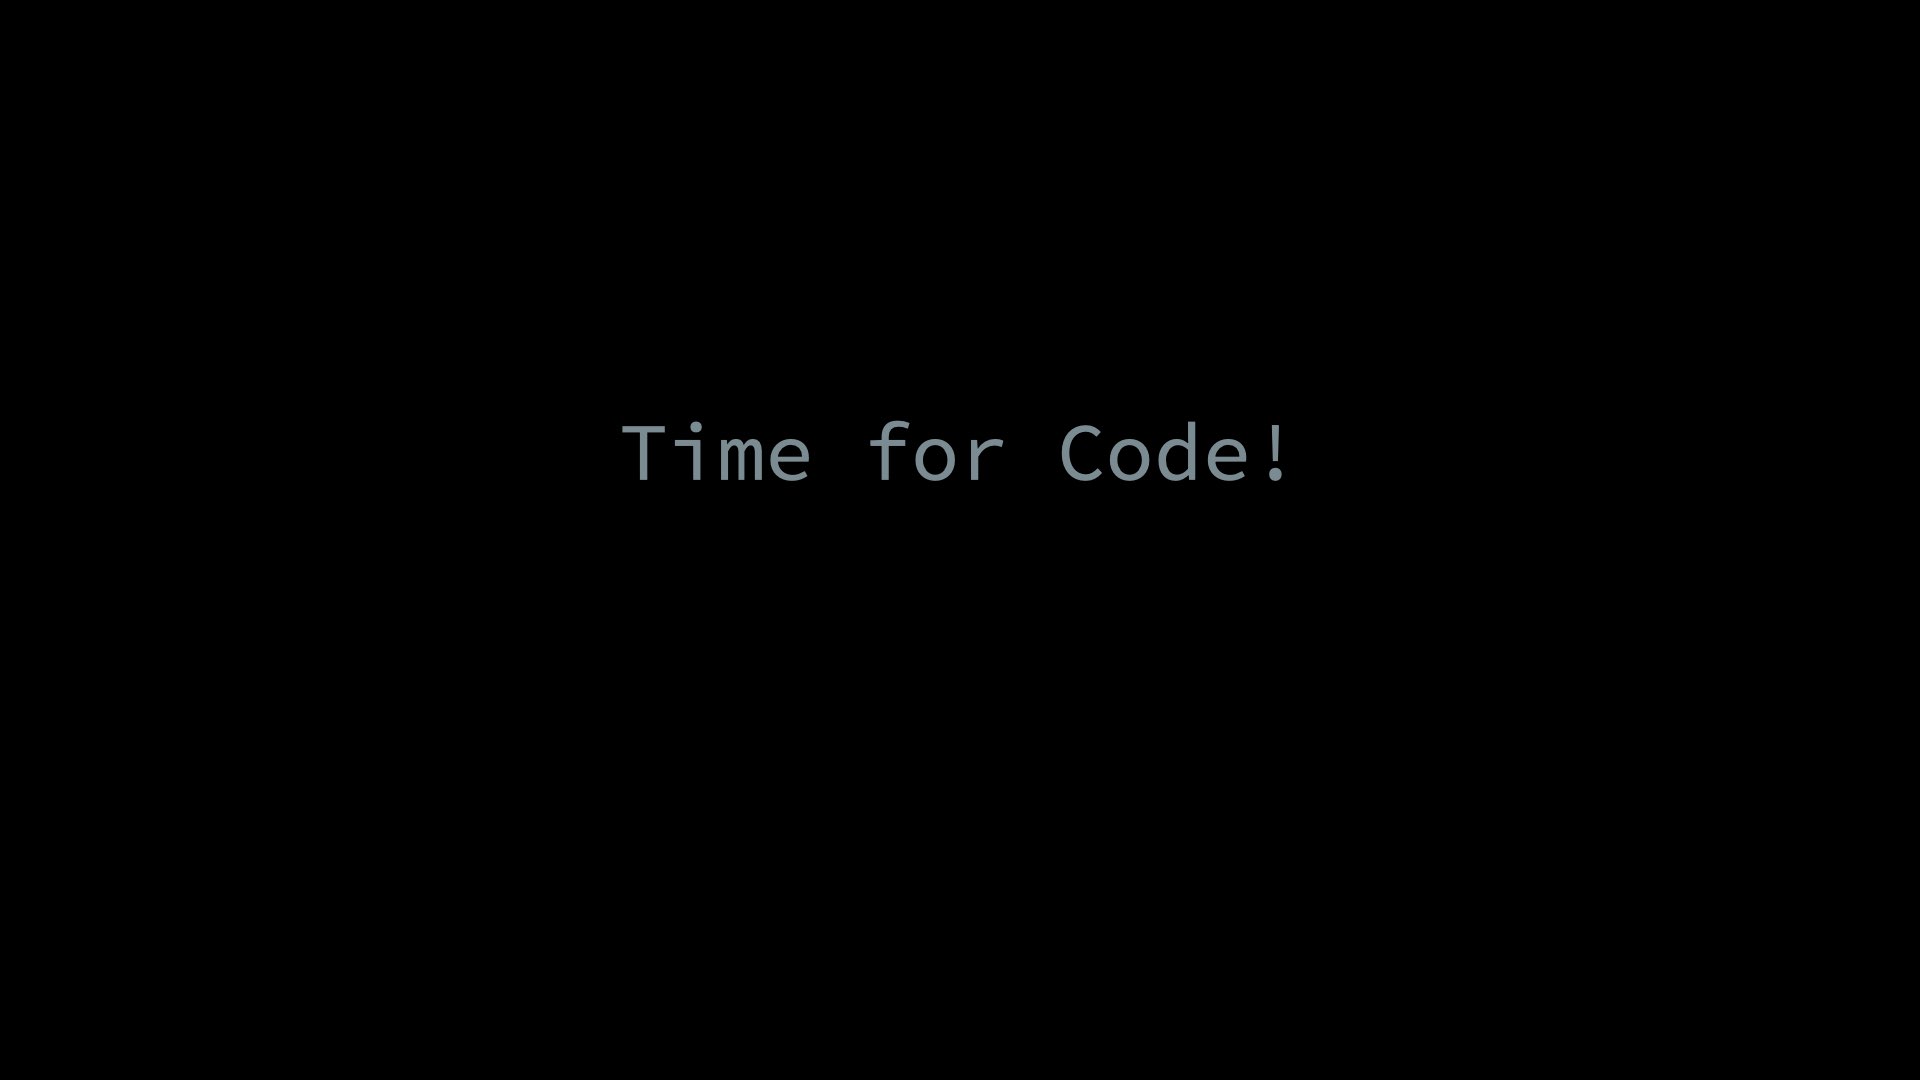 Time for Code!